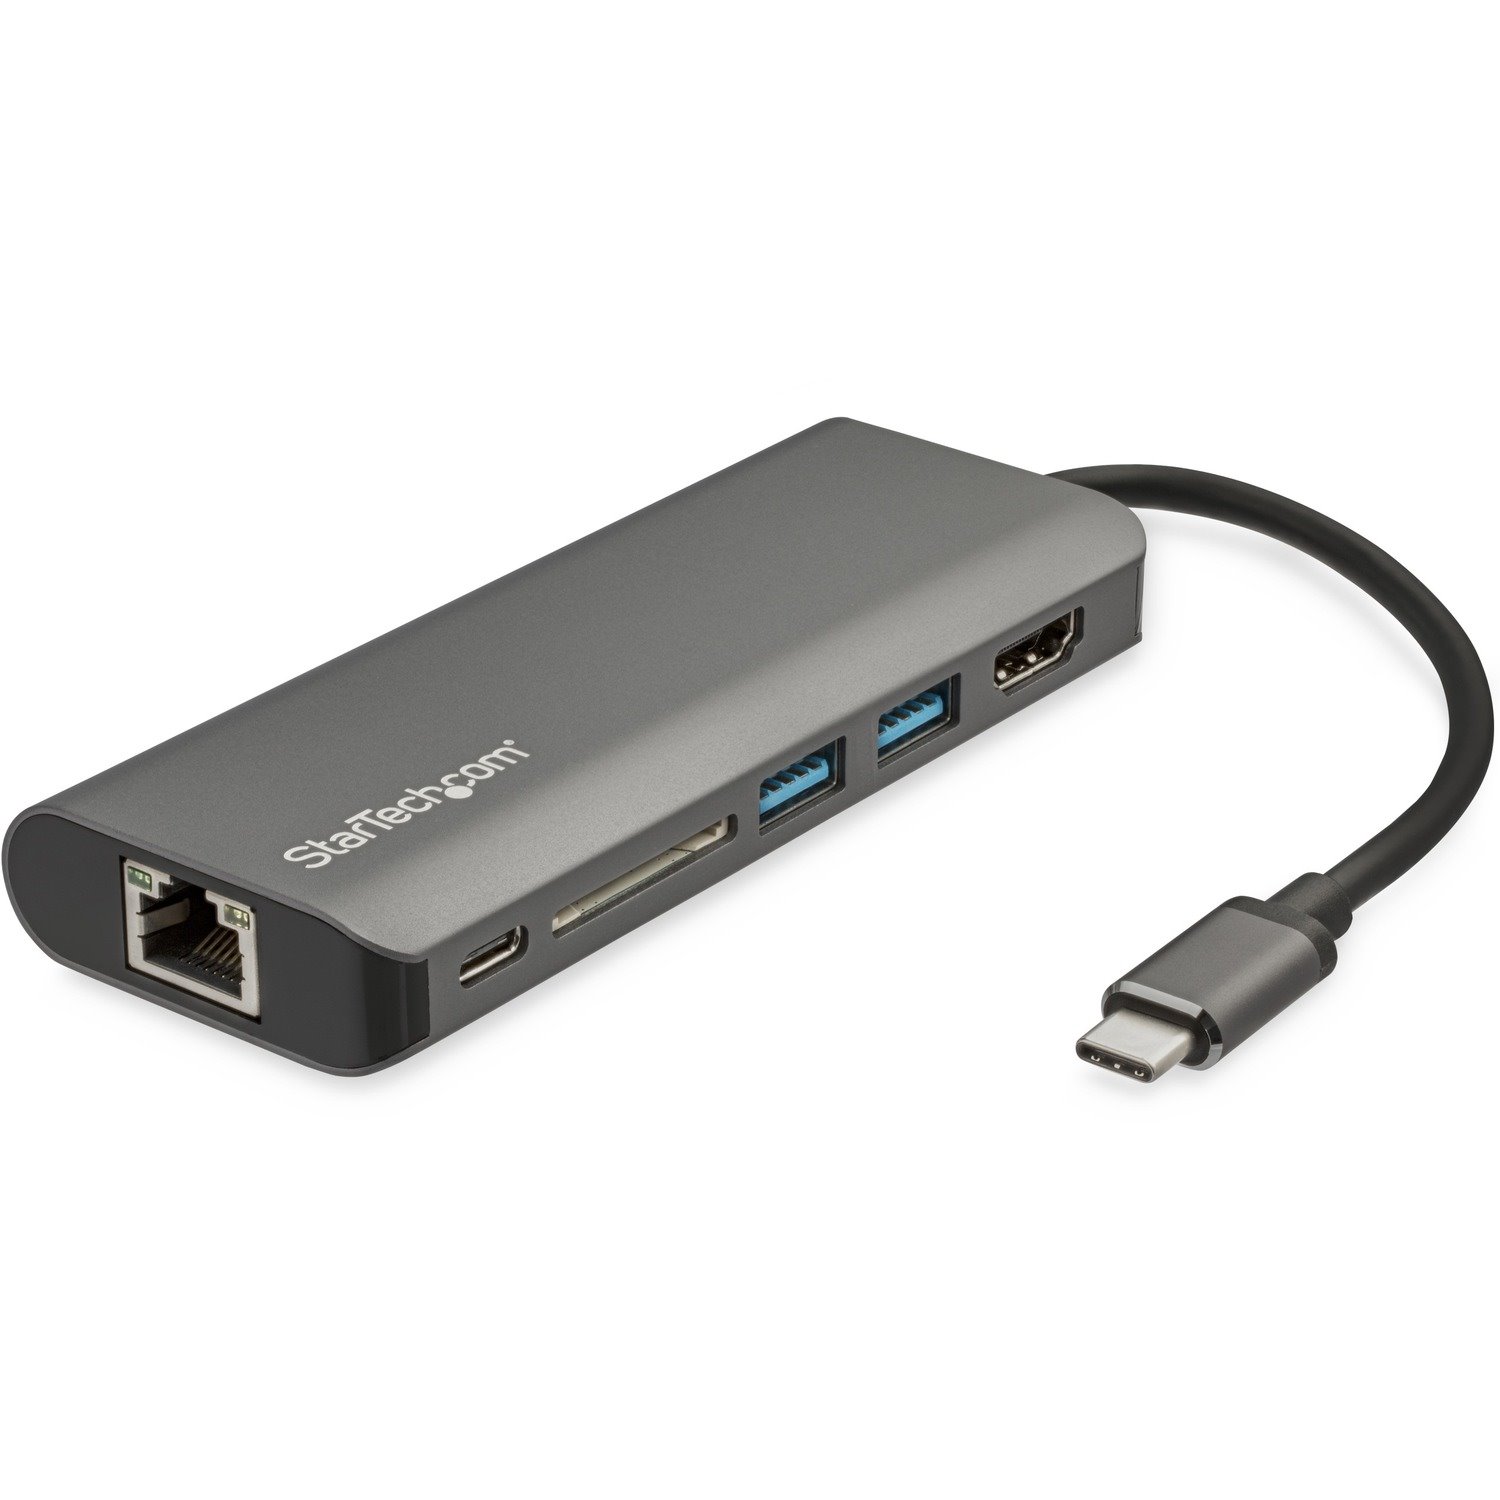 USB C Multiport Adapter with HDMI - 4K - Mac / Windows - SD - 2x USB-A - 1x USB-C - 60W PD 3.0 - USB C to USB 3.0 Hub